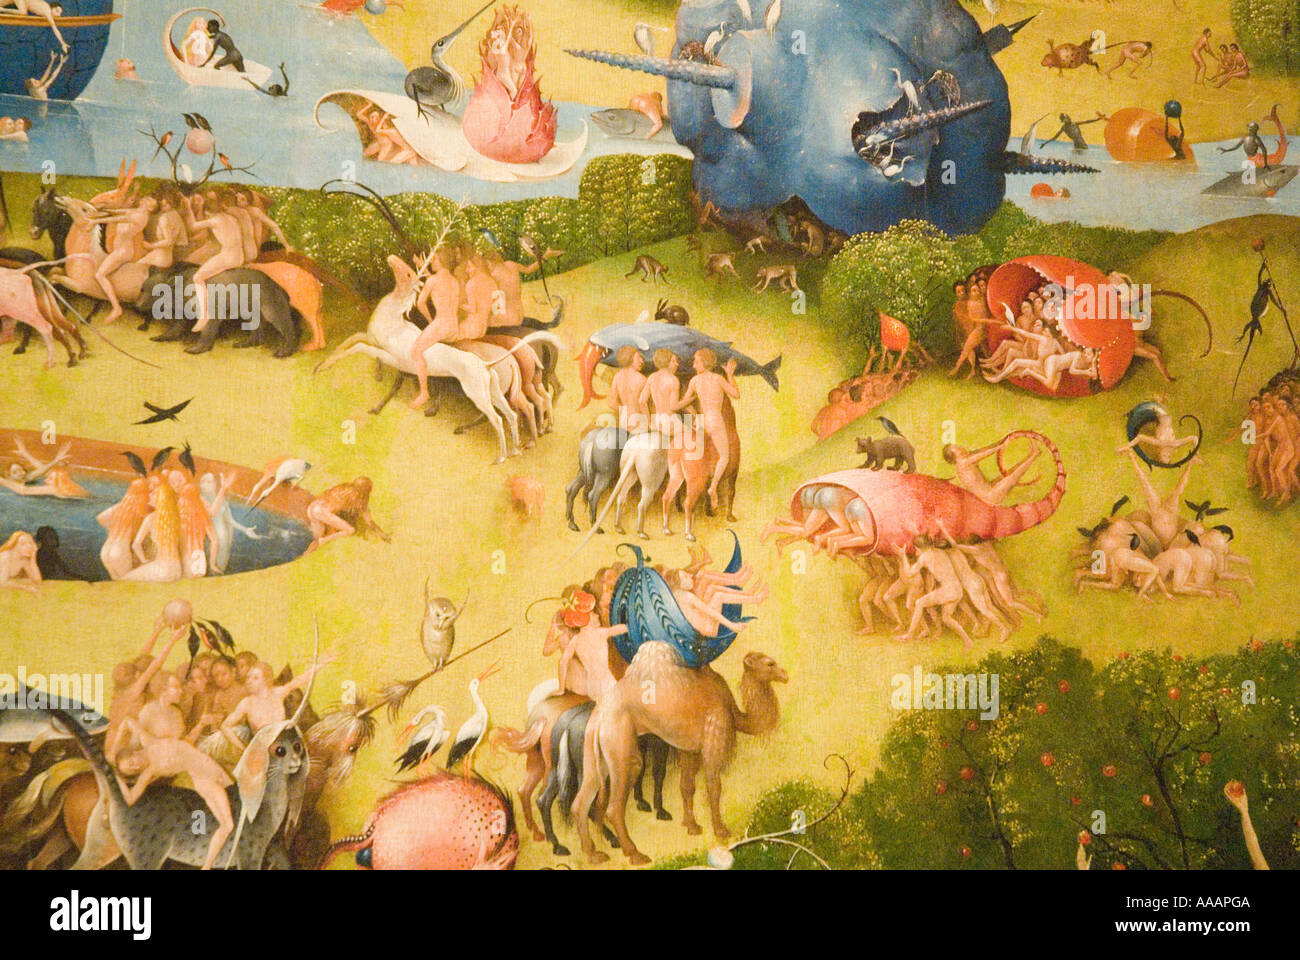 Garden Of Earthly Delights Painting By Hieronymus Bosch Stock